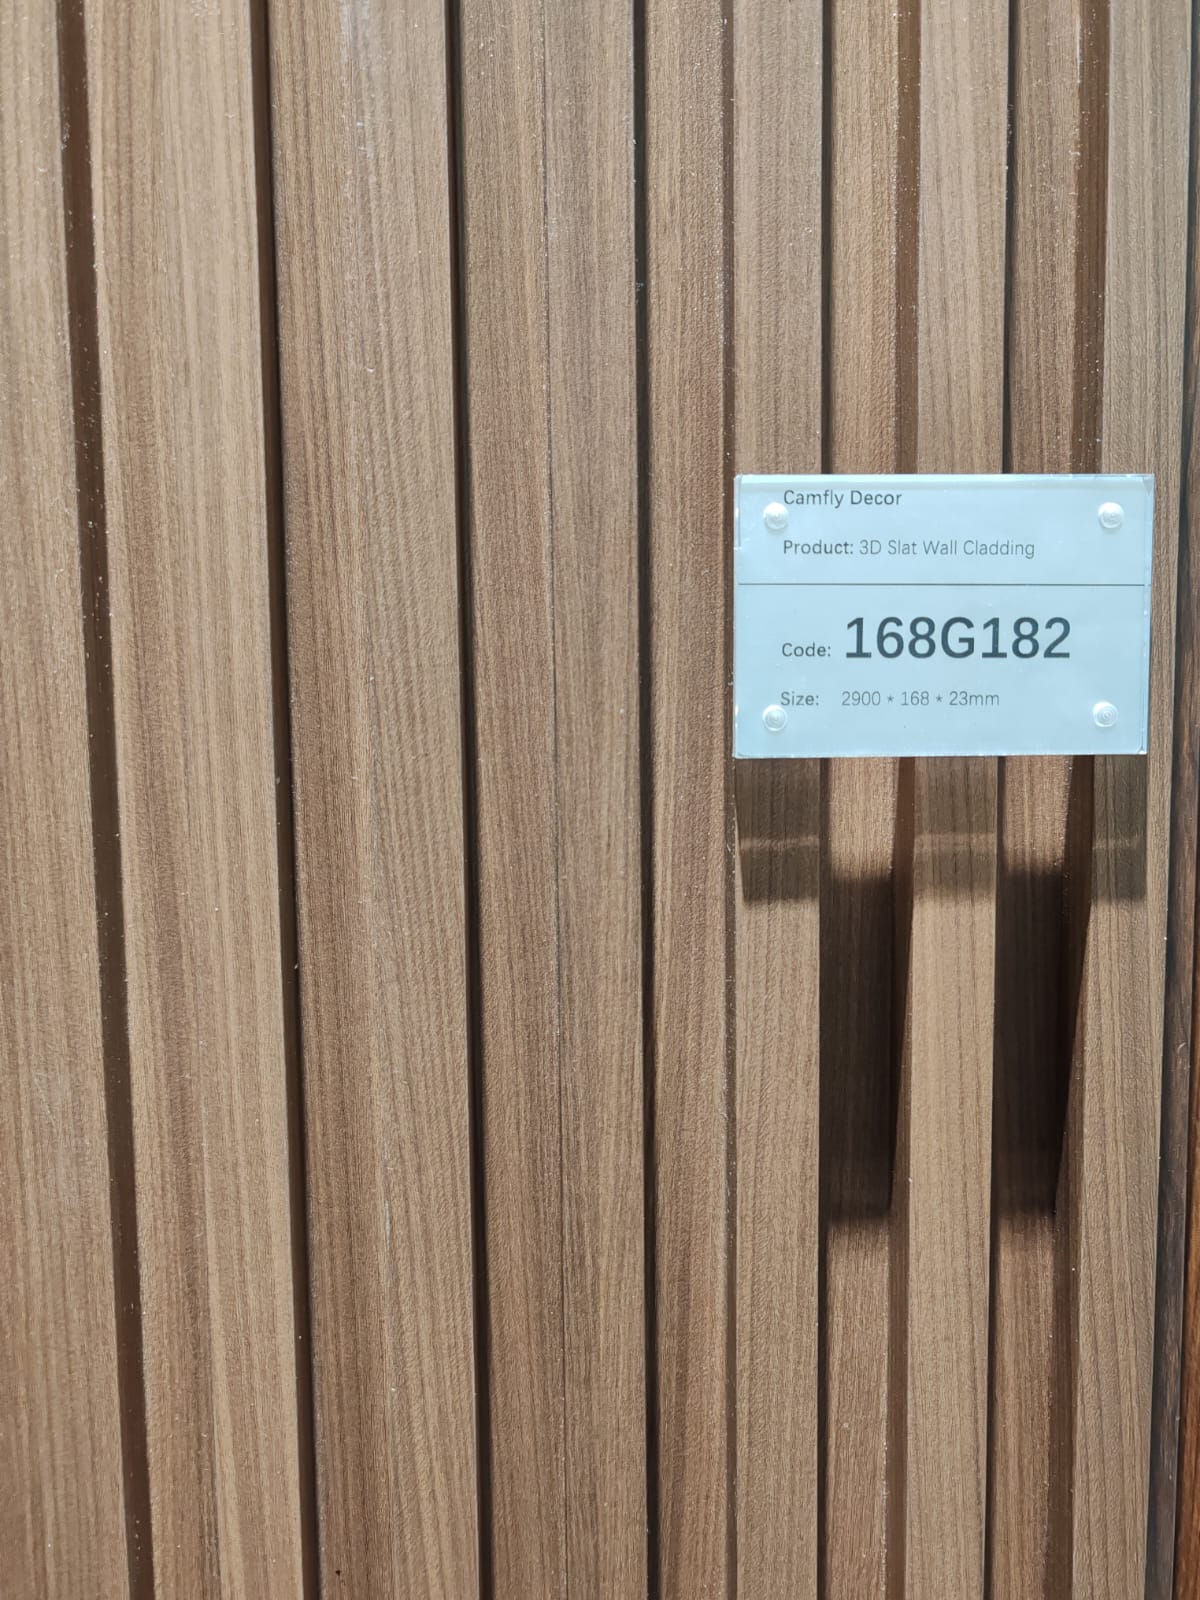 Camfly 168G182 Chestnut Fluted Slat Wall Cladding Length: 2900mm, Width: 170mm, Thickness: 23mm (Copy)